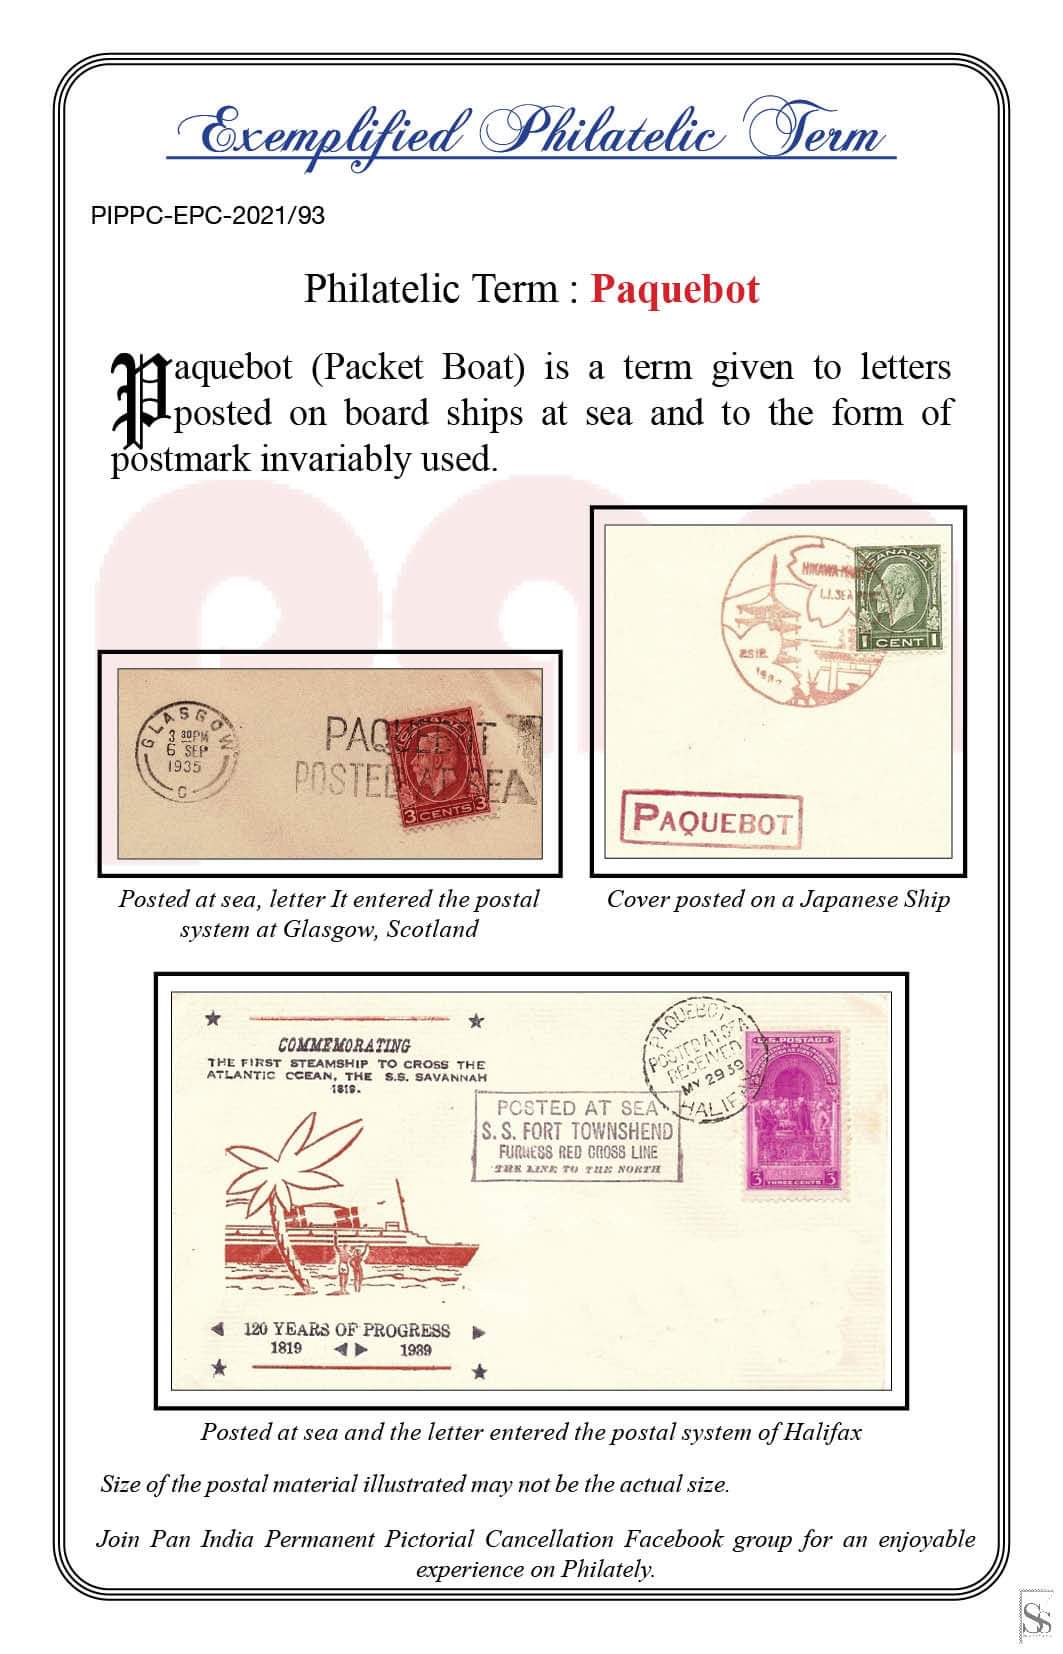 93. Today's exemplified philatelic term-Paquebot